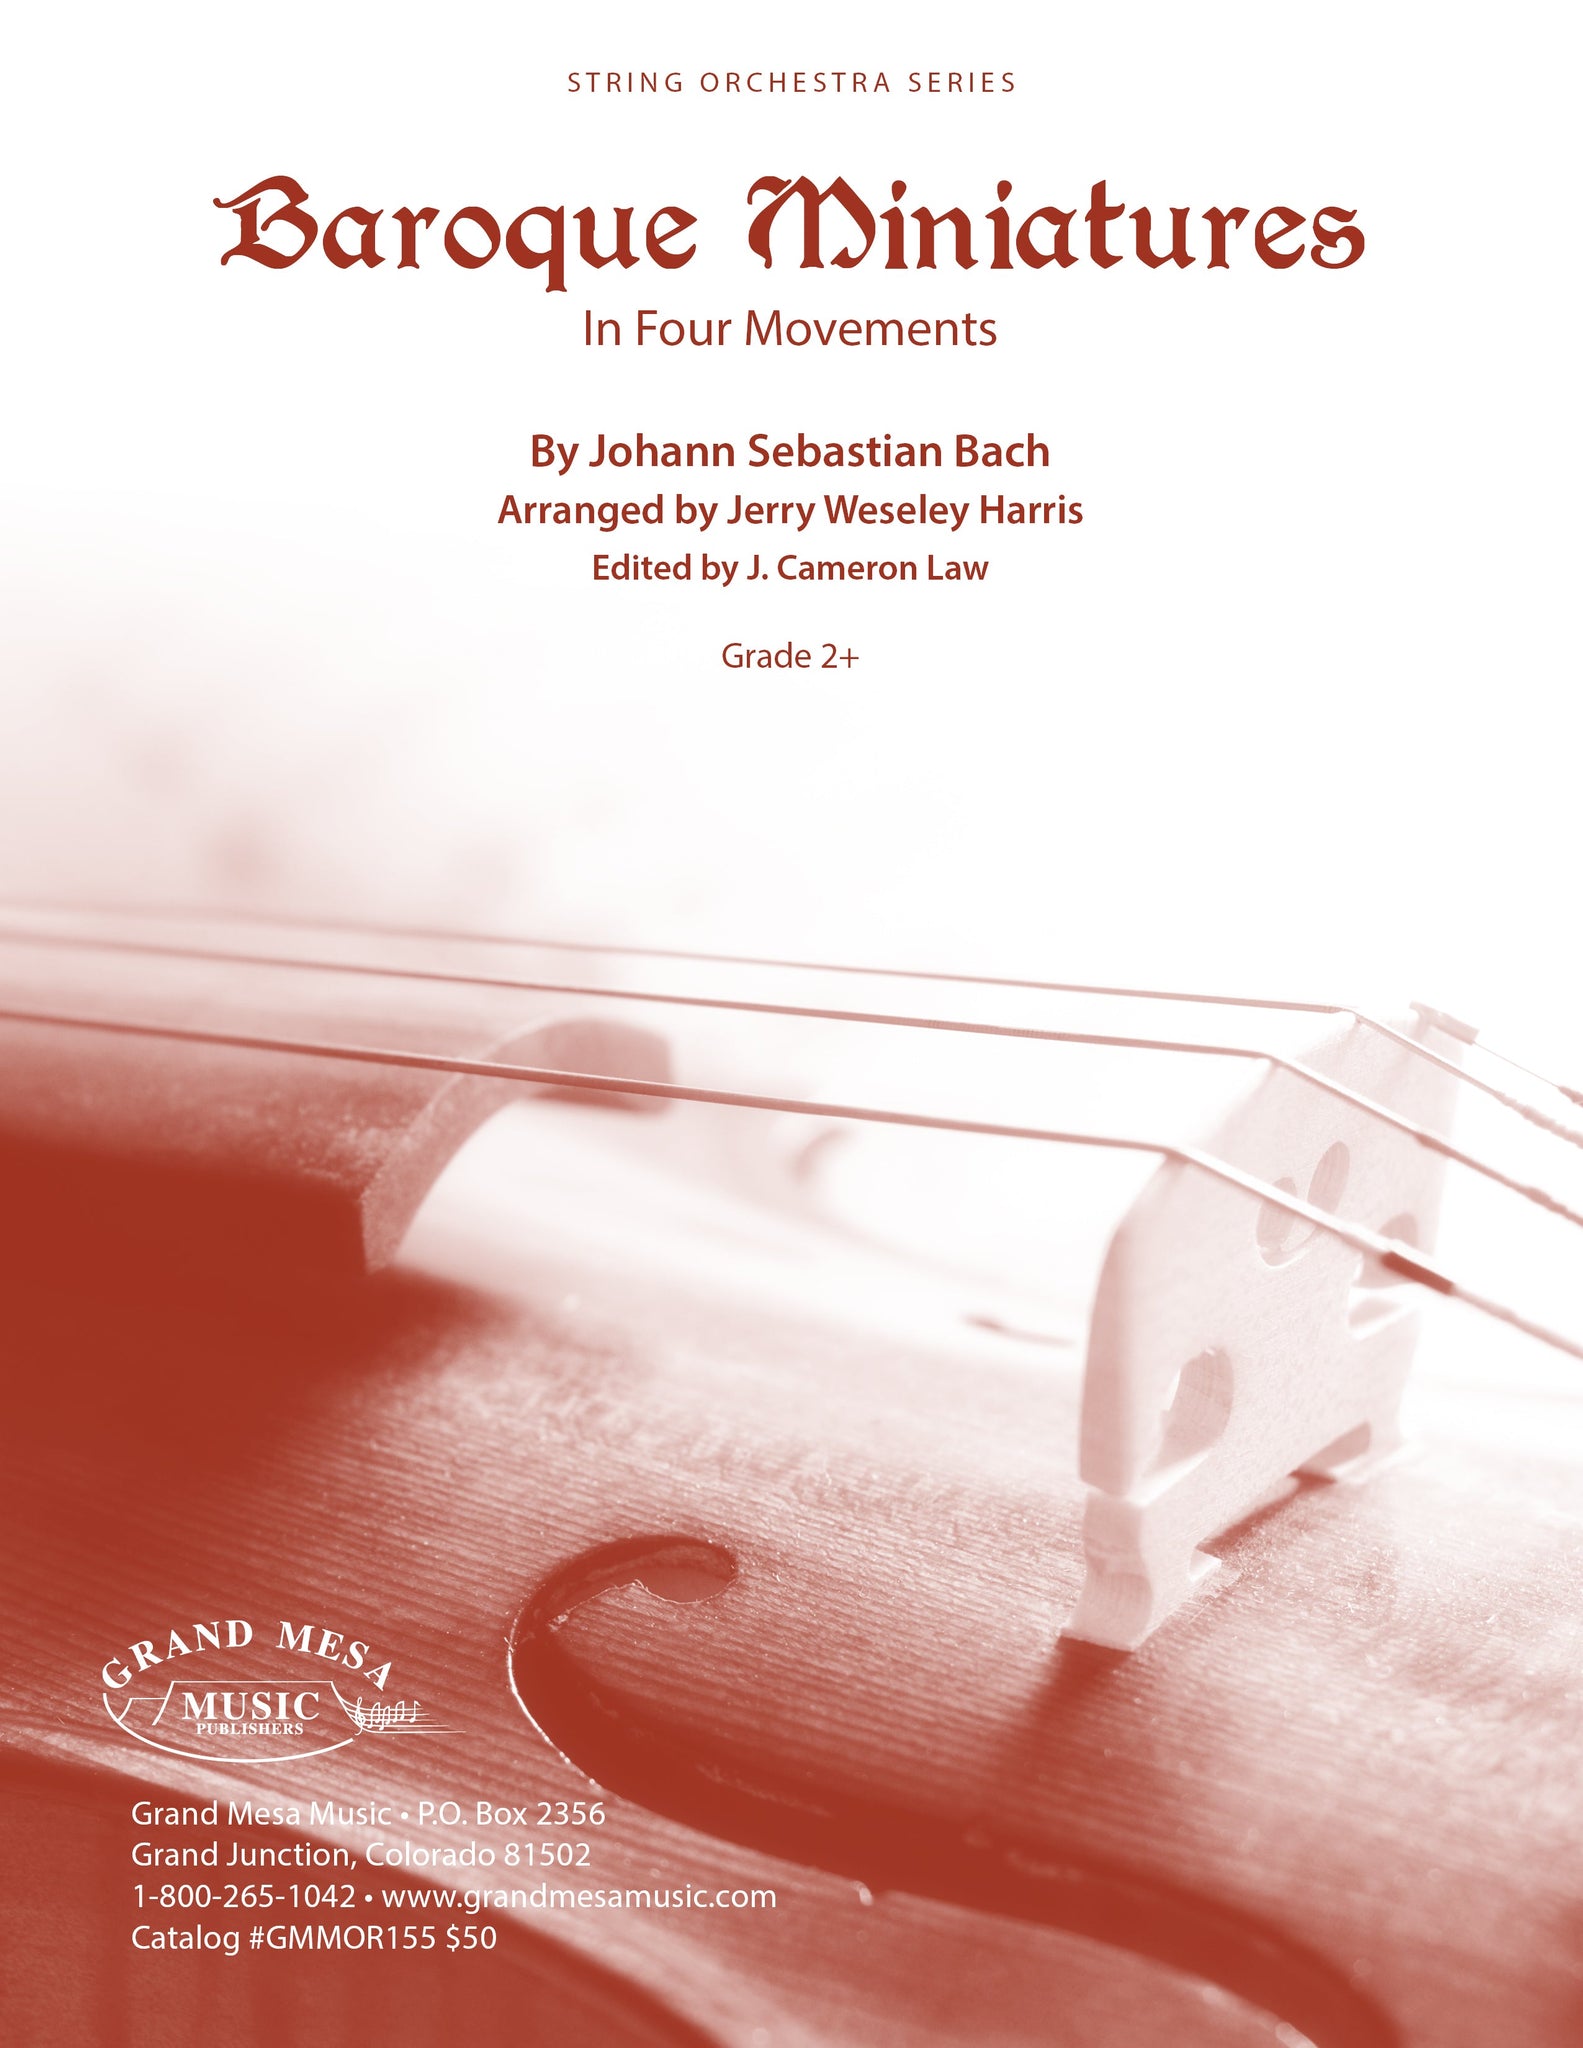 Strings sheet music cover of Baroque Miniatures, composed by J.S. Bach, arranged by Jerry Weseley Harris.